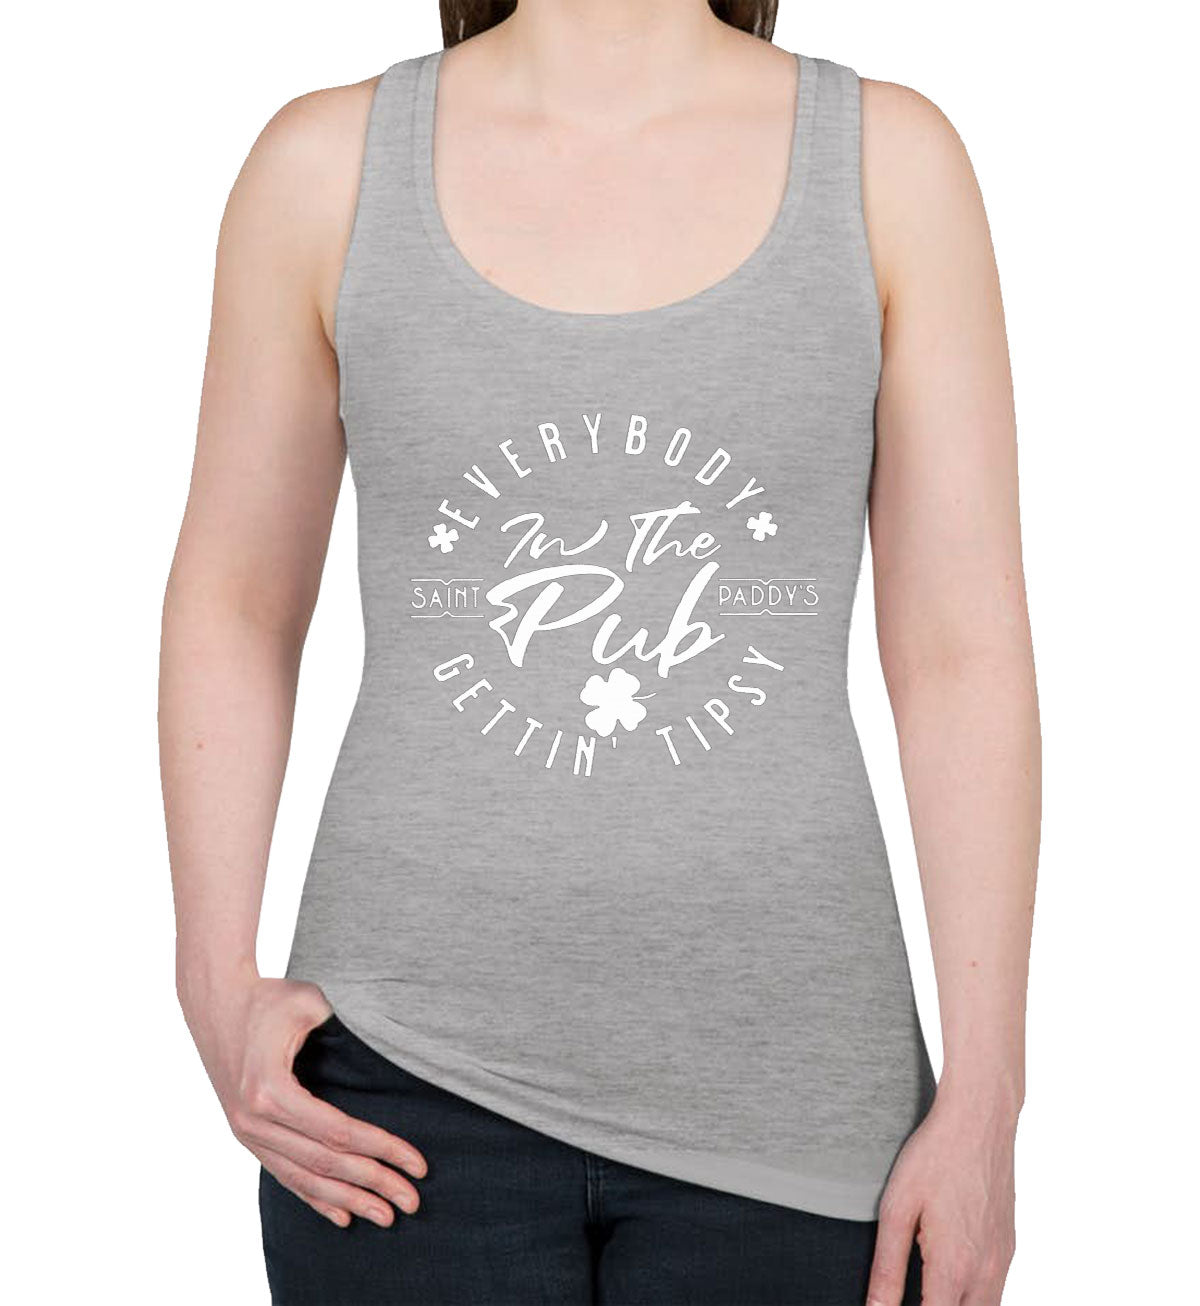 Everybody In The Pub Getting Tipsy St. Patrick's Day Women's Racerback Tank Top